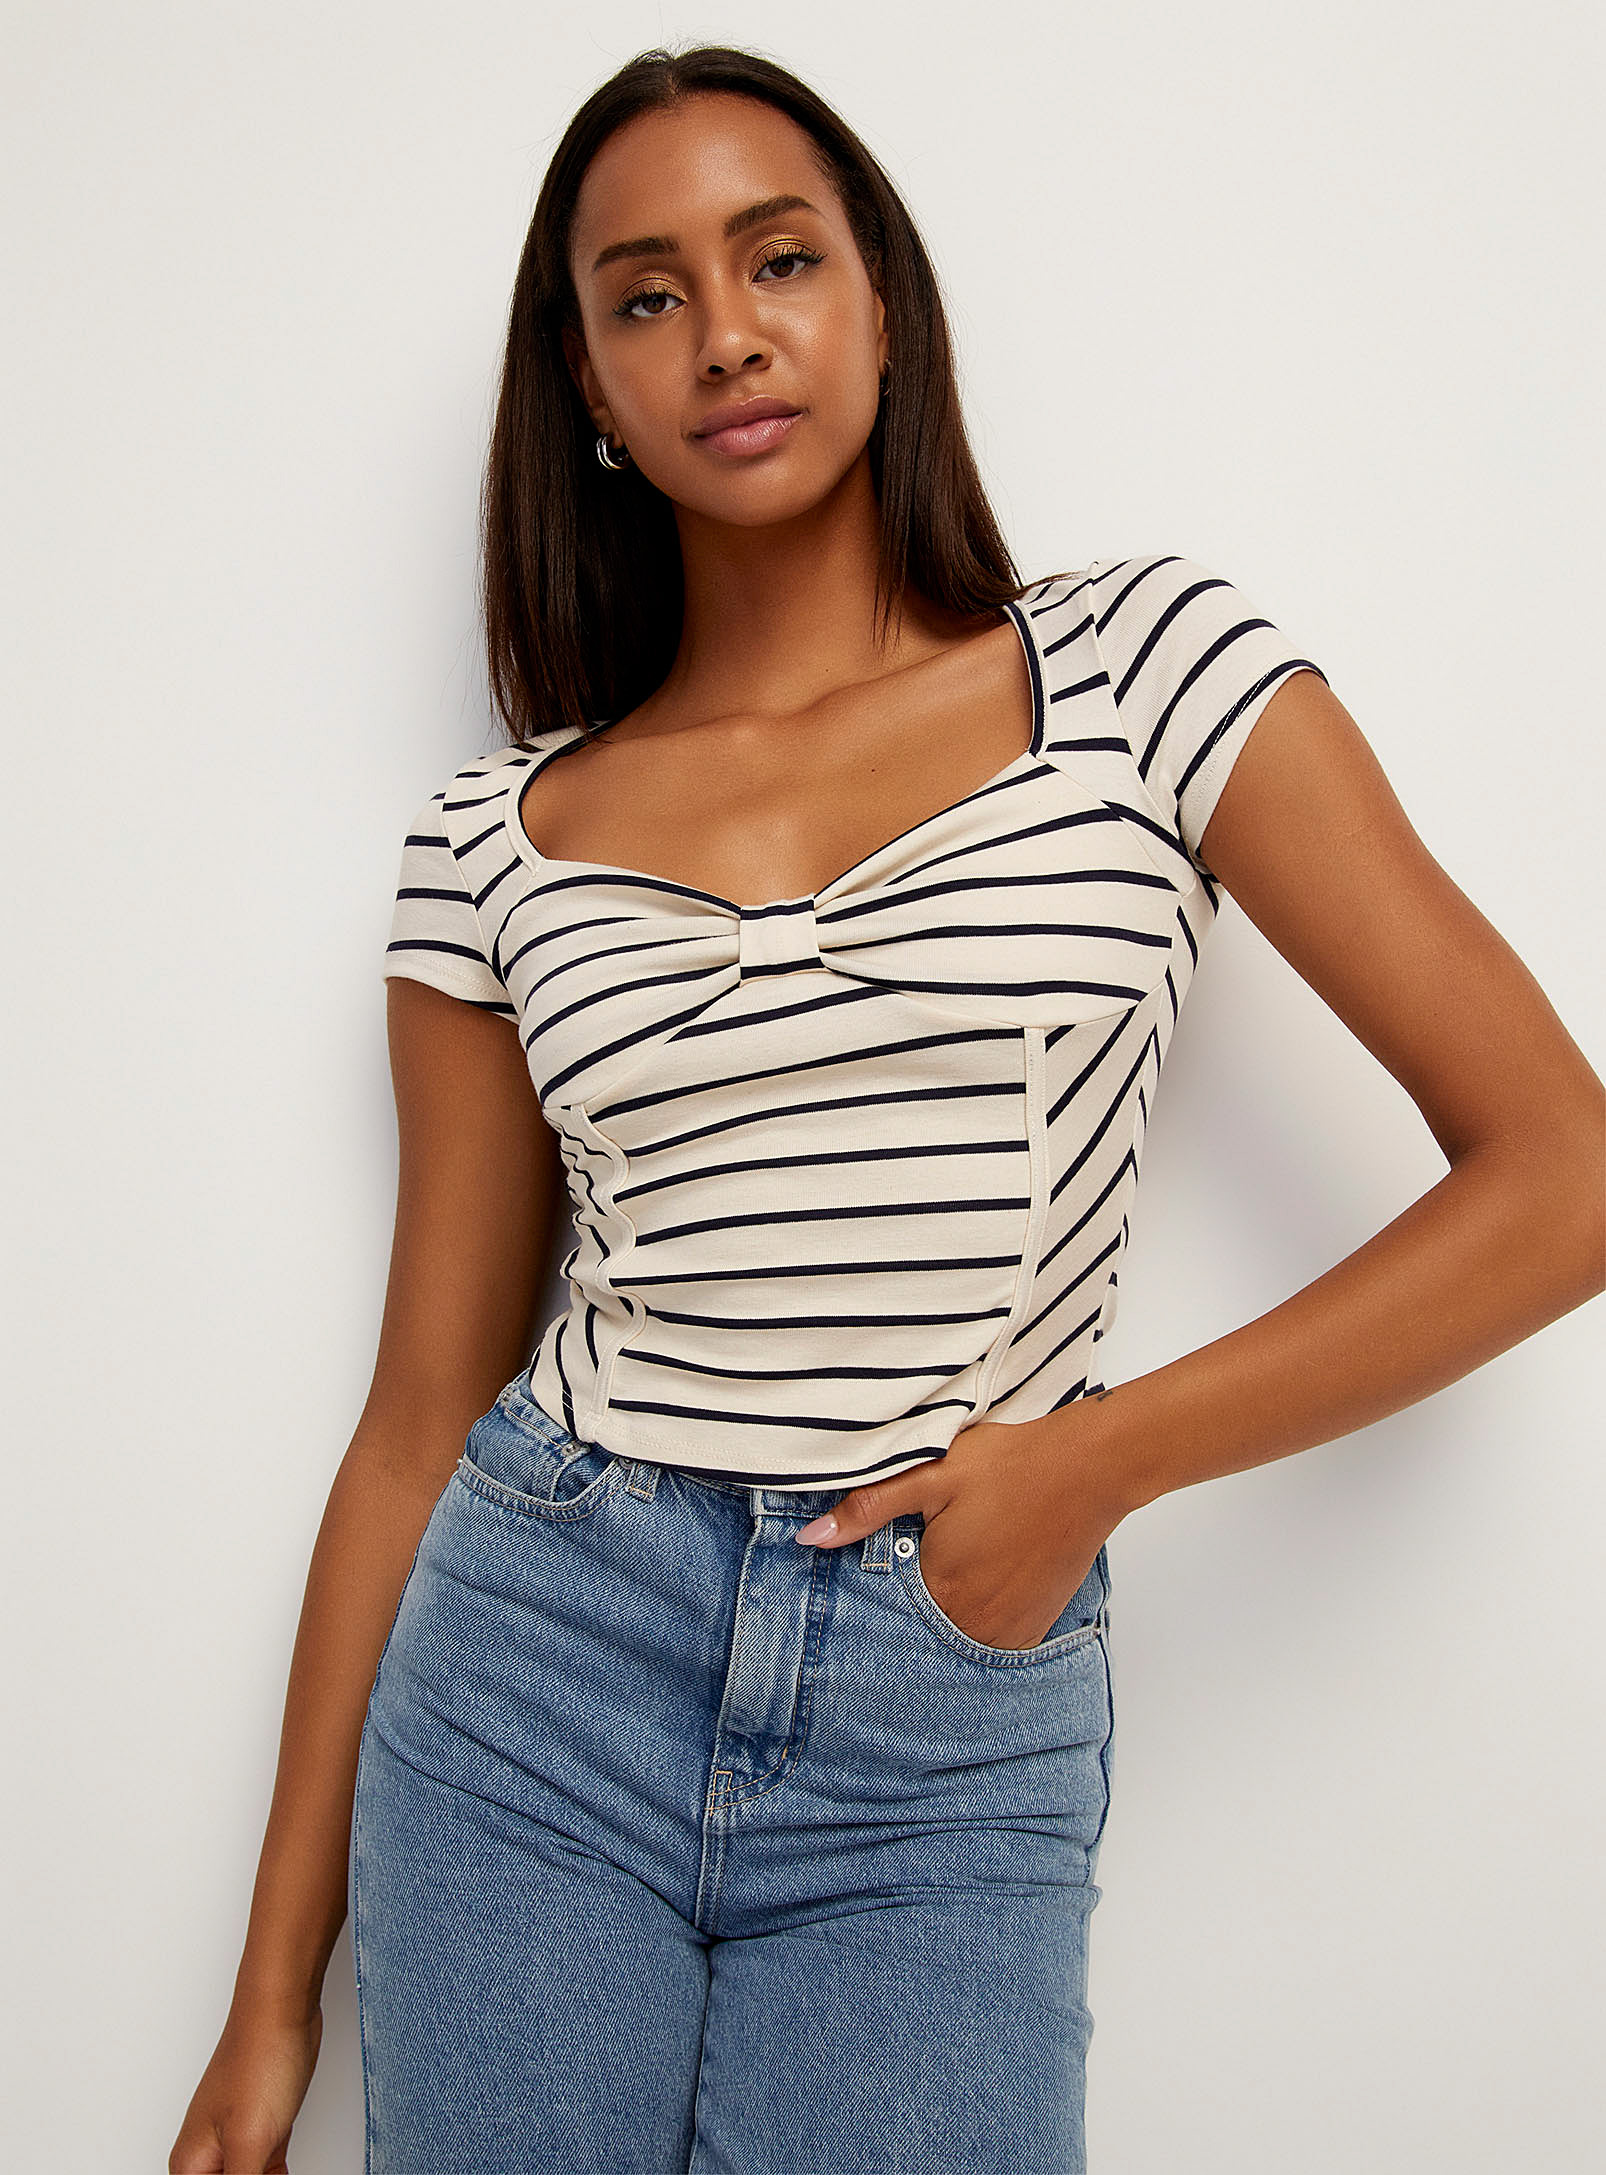 Icone Bow Effect Sailor Stripes Cropped T-shirt In Patterned Blue